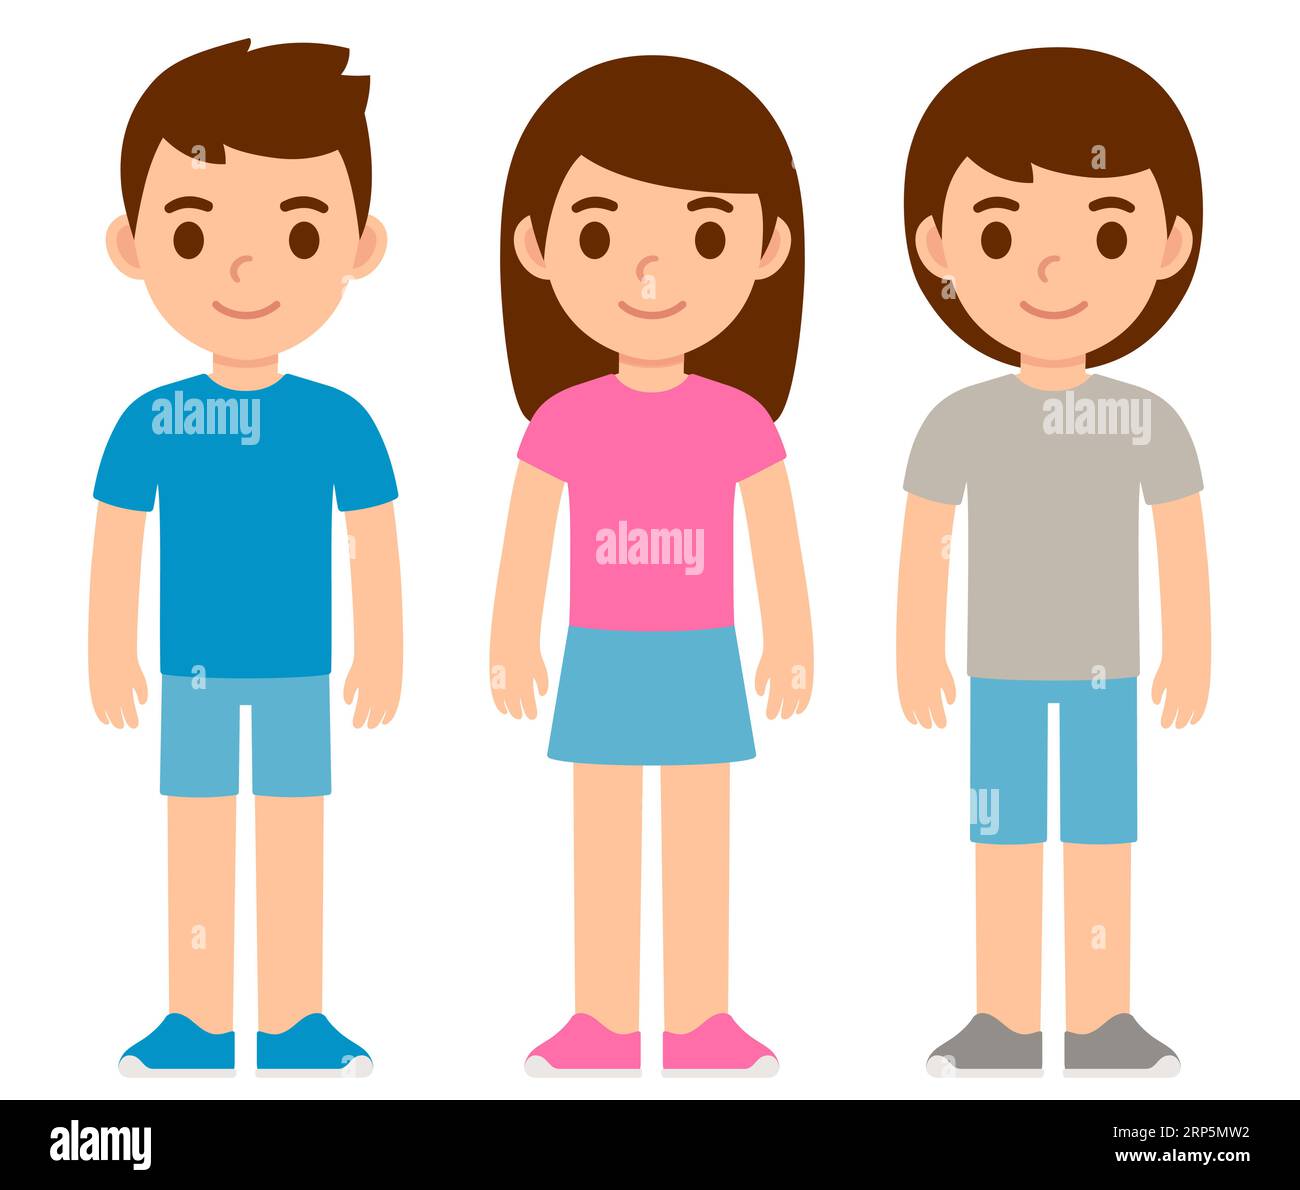 Cute cartoon boy in blue shirt, girl in pink shirt and kid in unisex clothes. Children gender expression. Simple flat vector illustration. Stock Vector